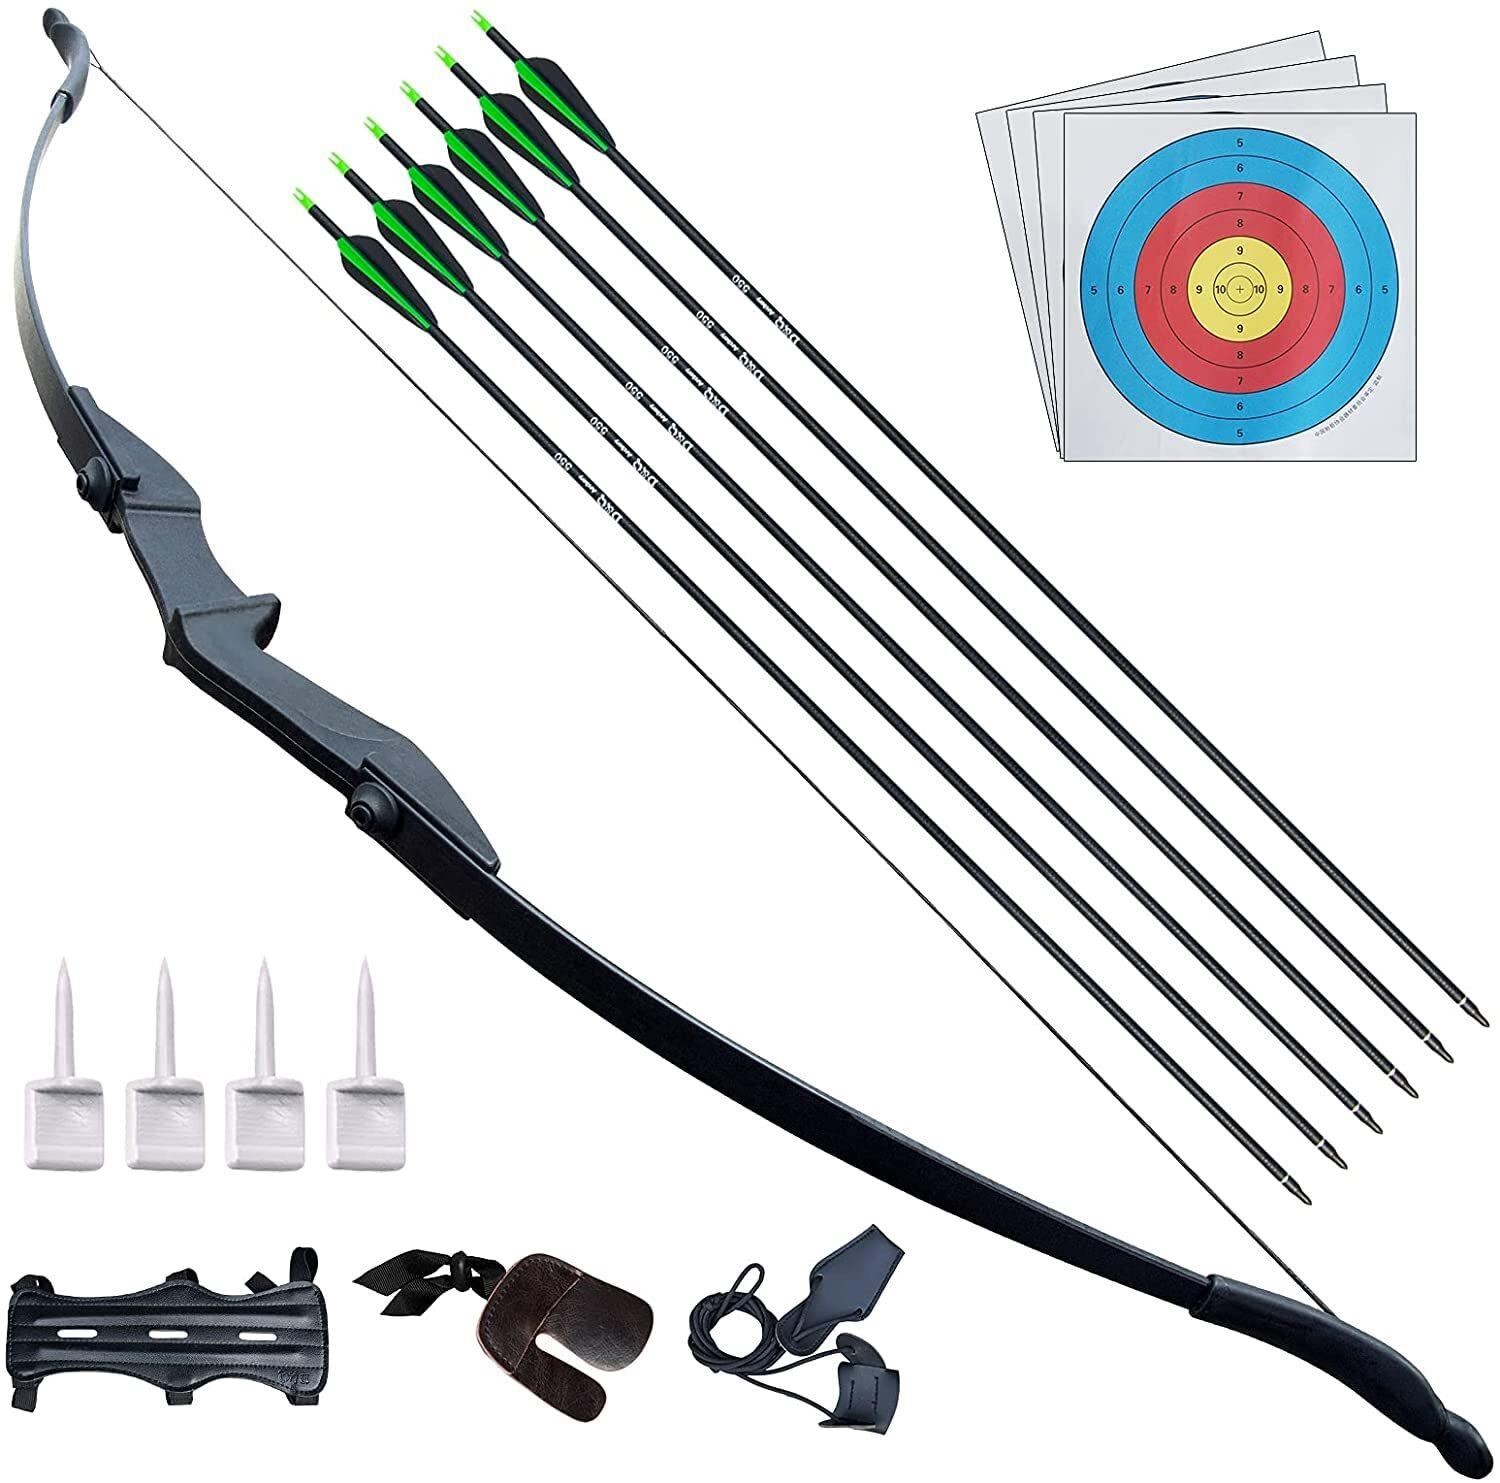 D&Q Archery Bow and Arrow for Adults Beginner